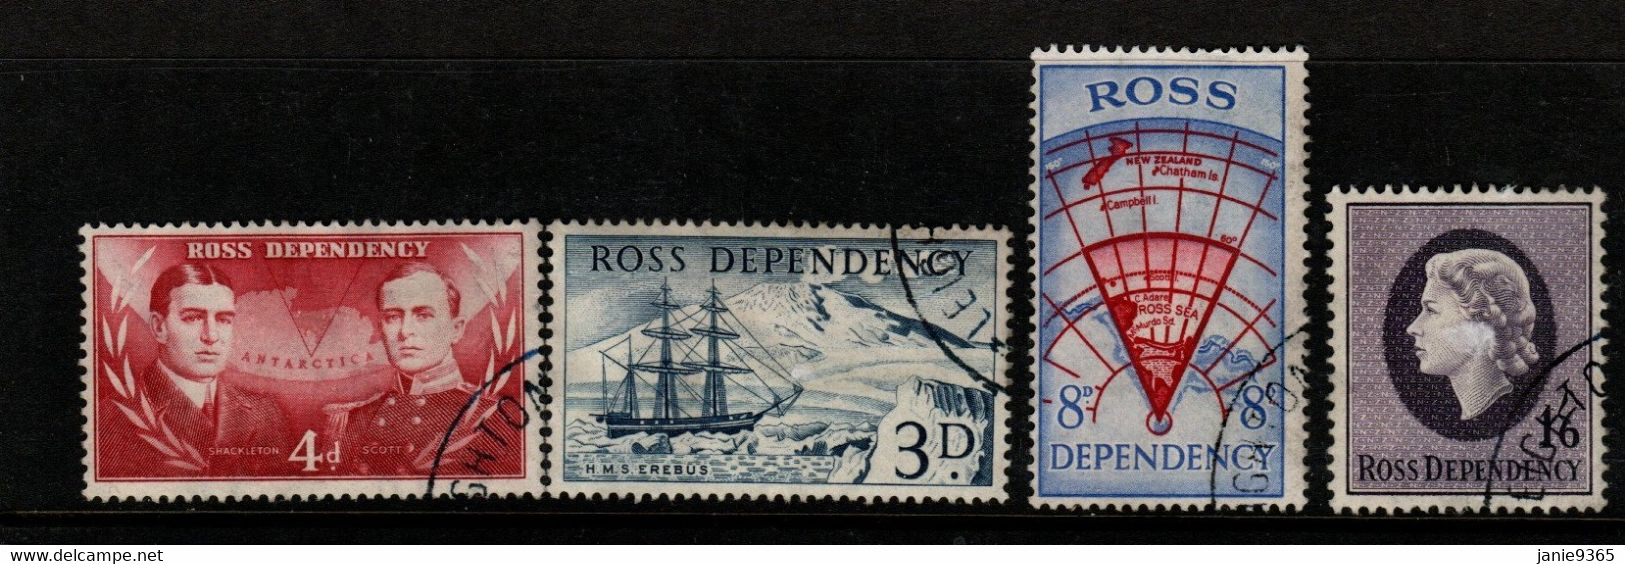 Ross Dependency SG 1-4 1957 Definitives,used - Used Stamps